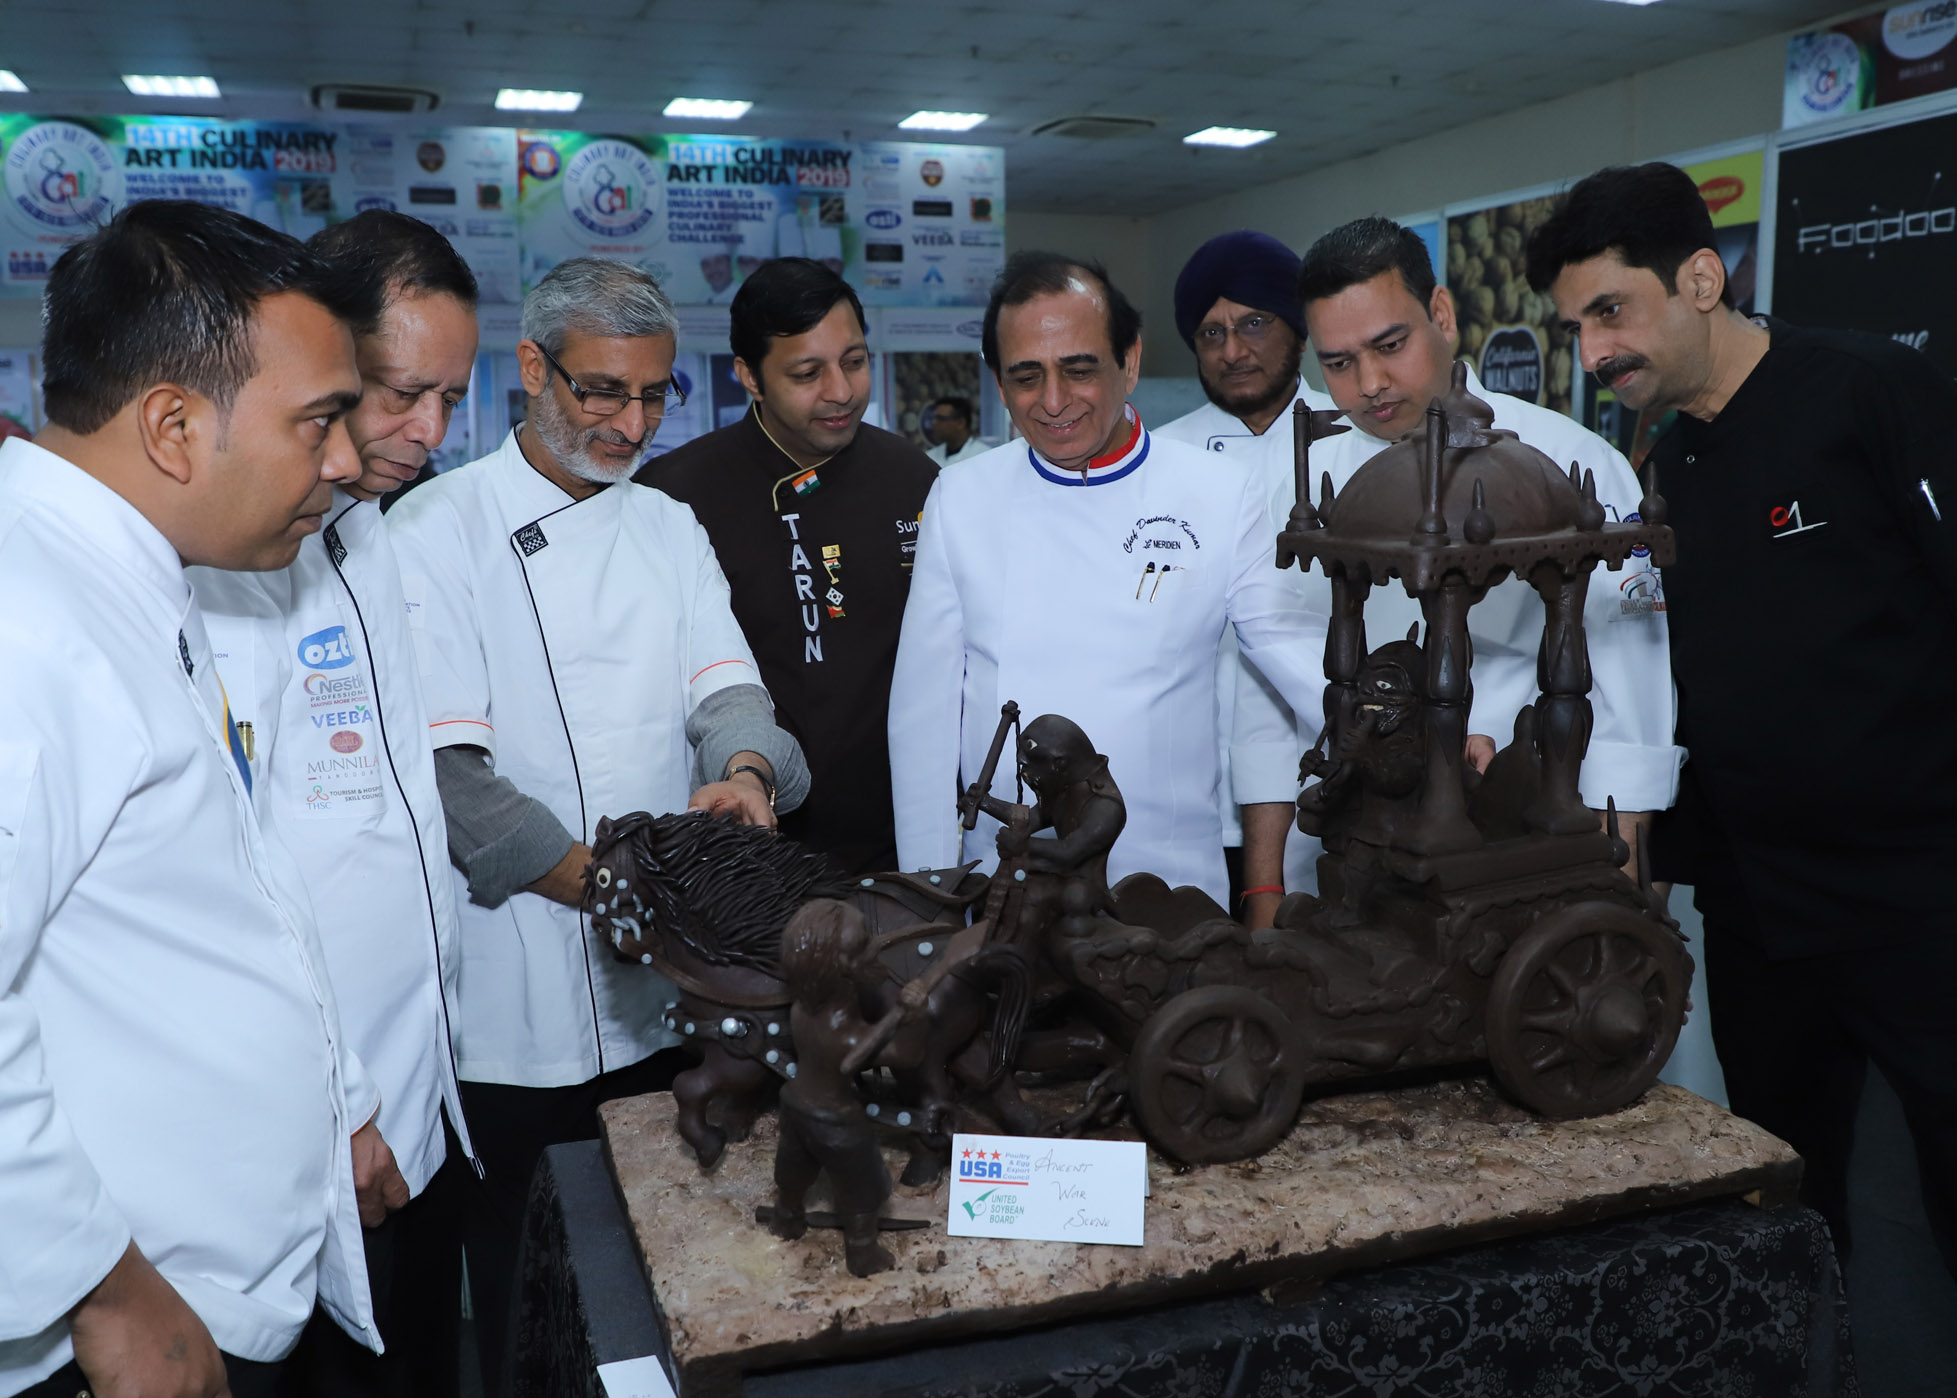 Indian Culinary Forum to host 15th edition of Culinary Art India at AAHAR International Fair 2023